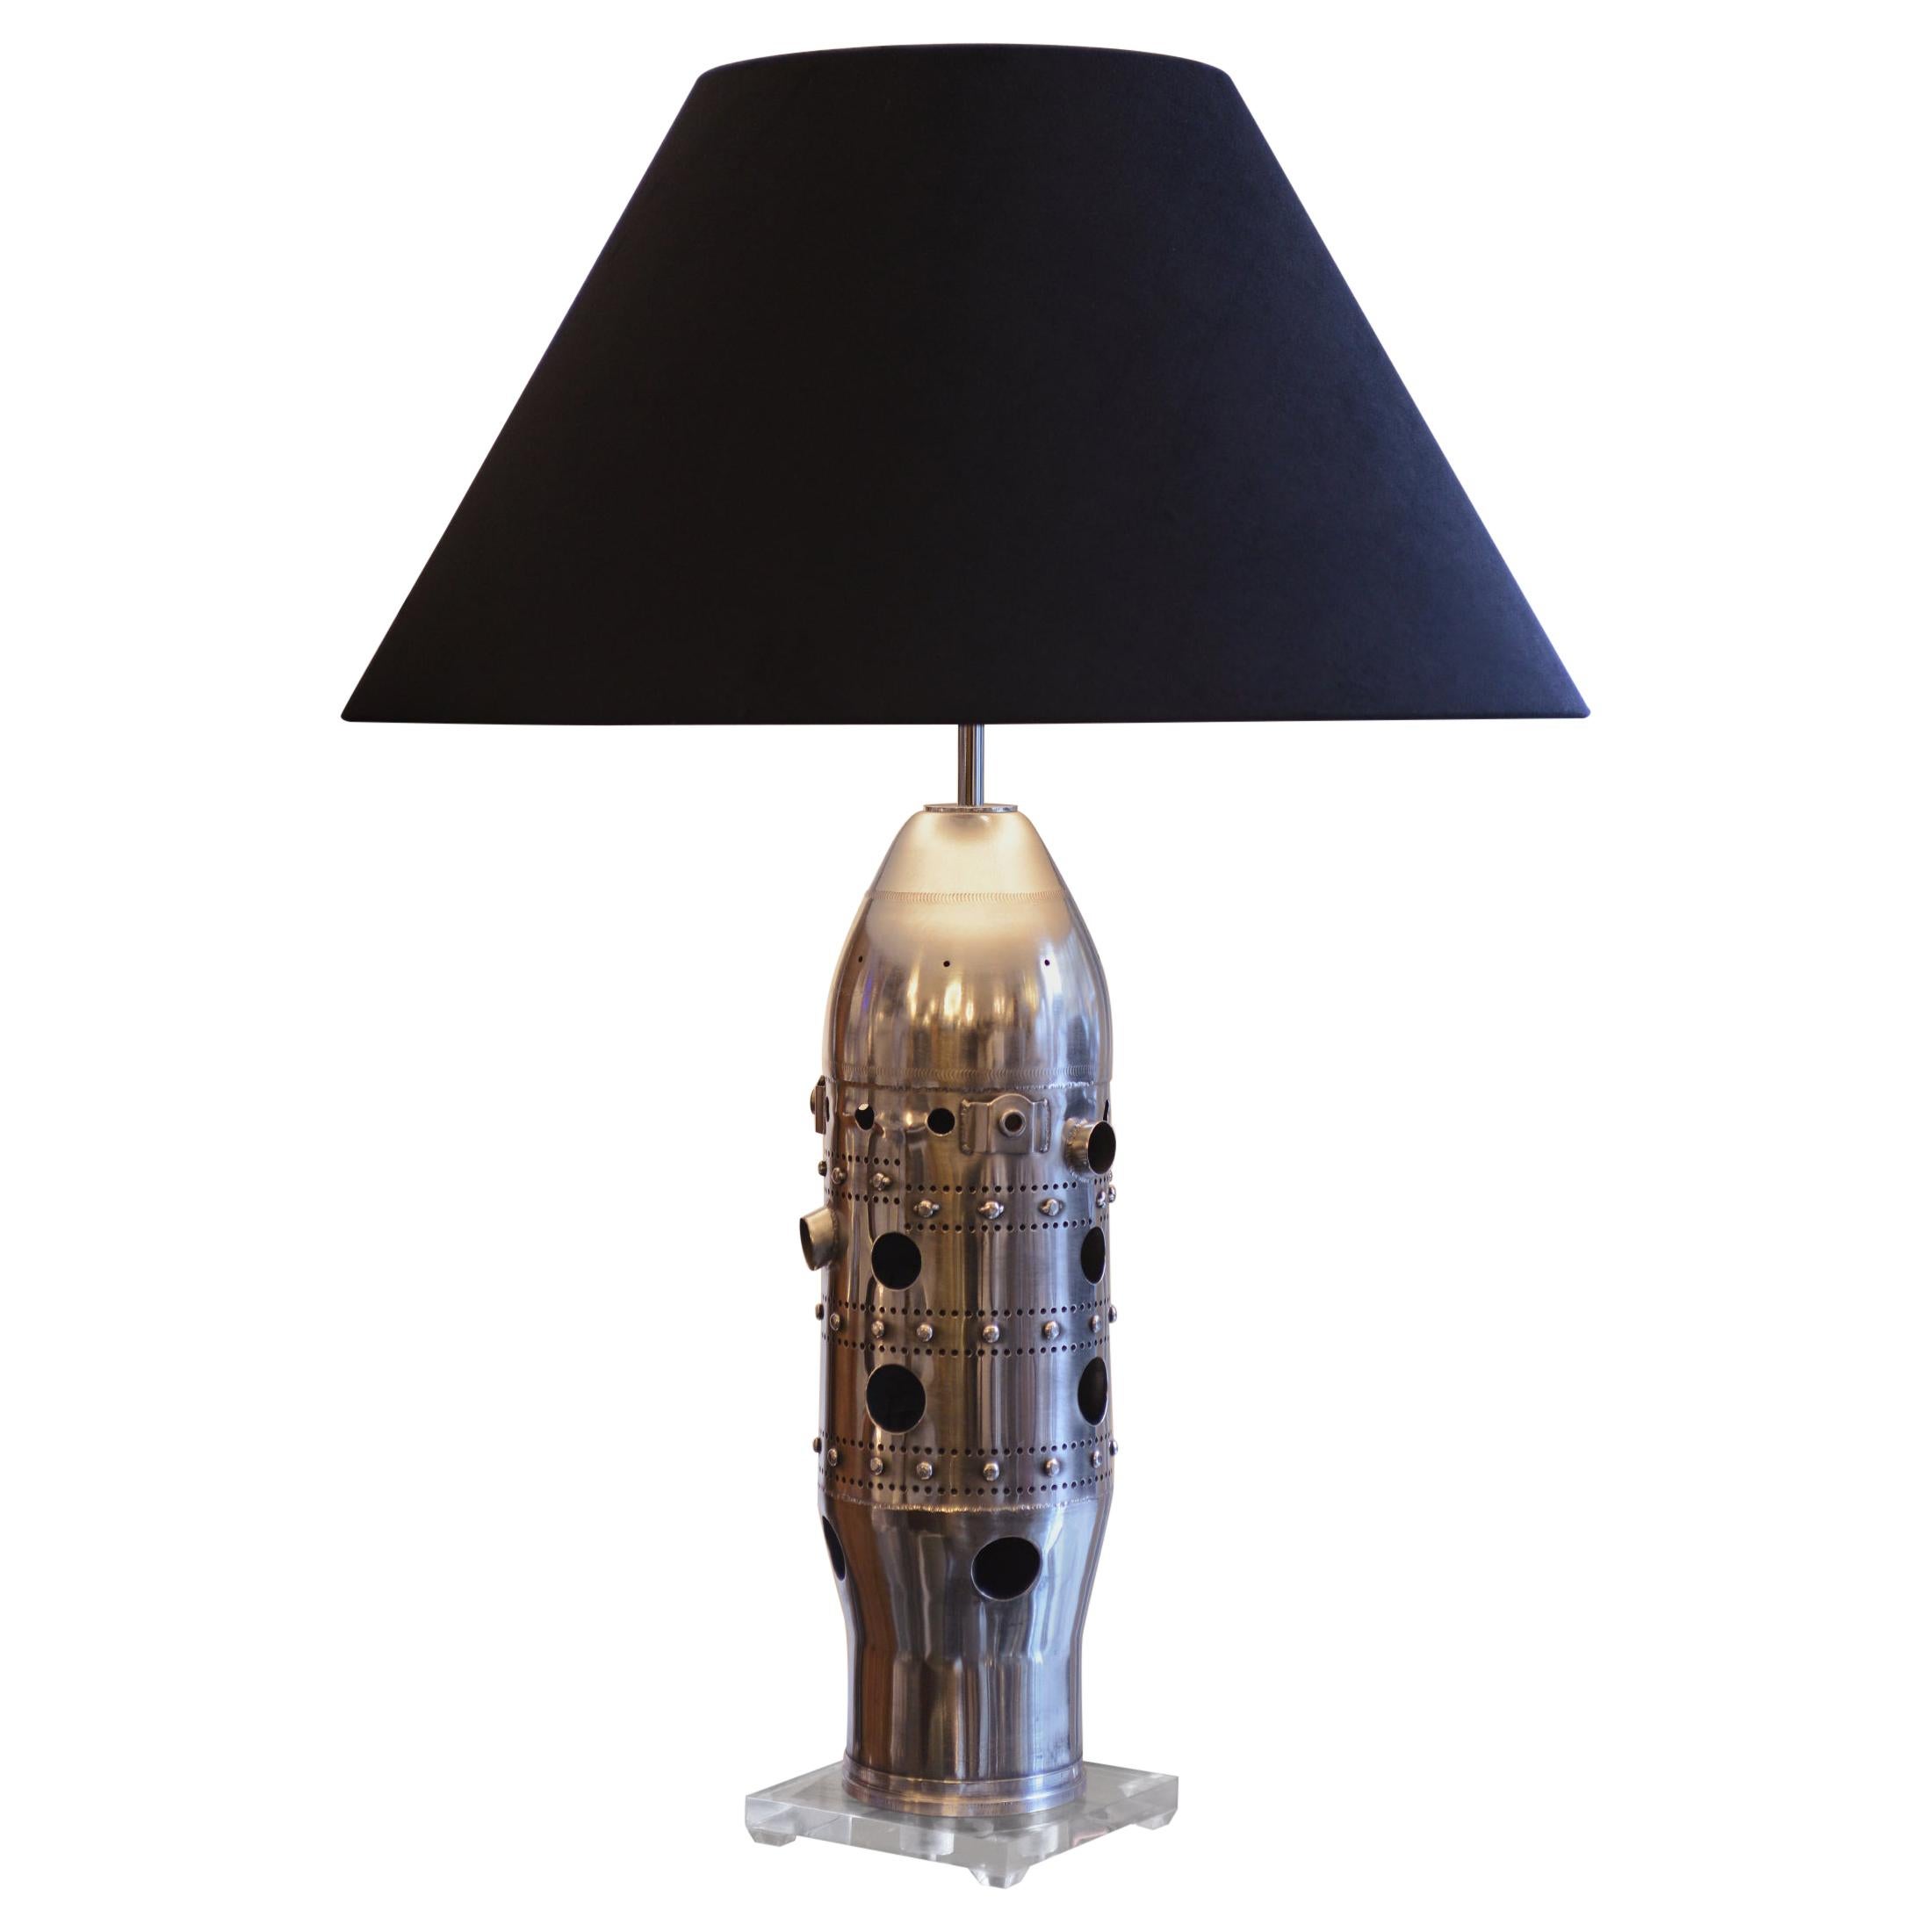 CFM56 Combustion Chamber Table Lamp For Sale